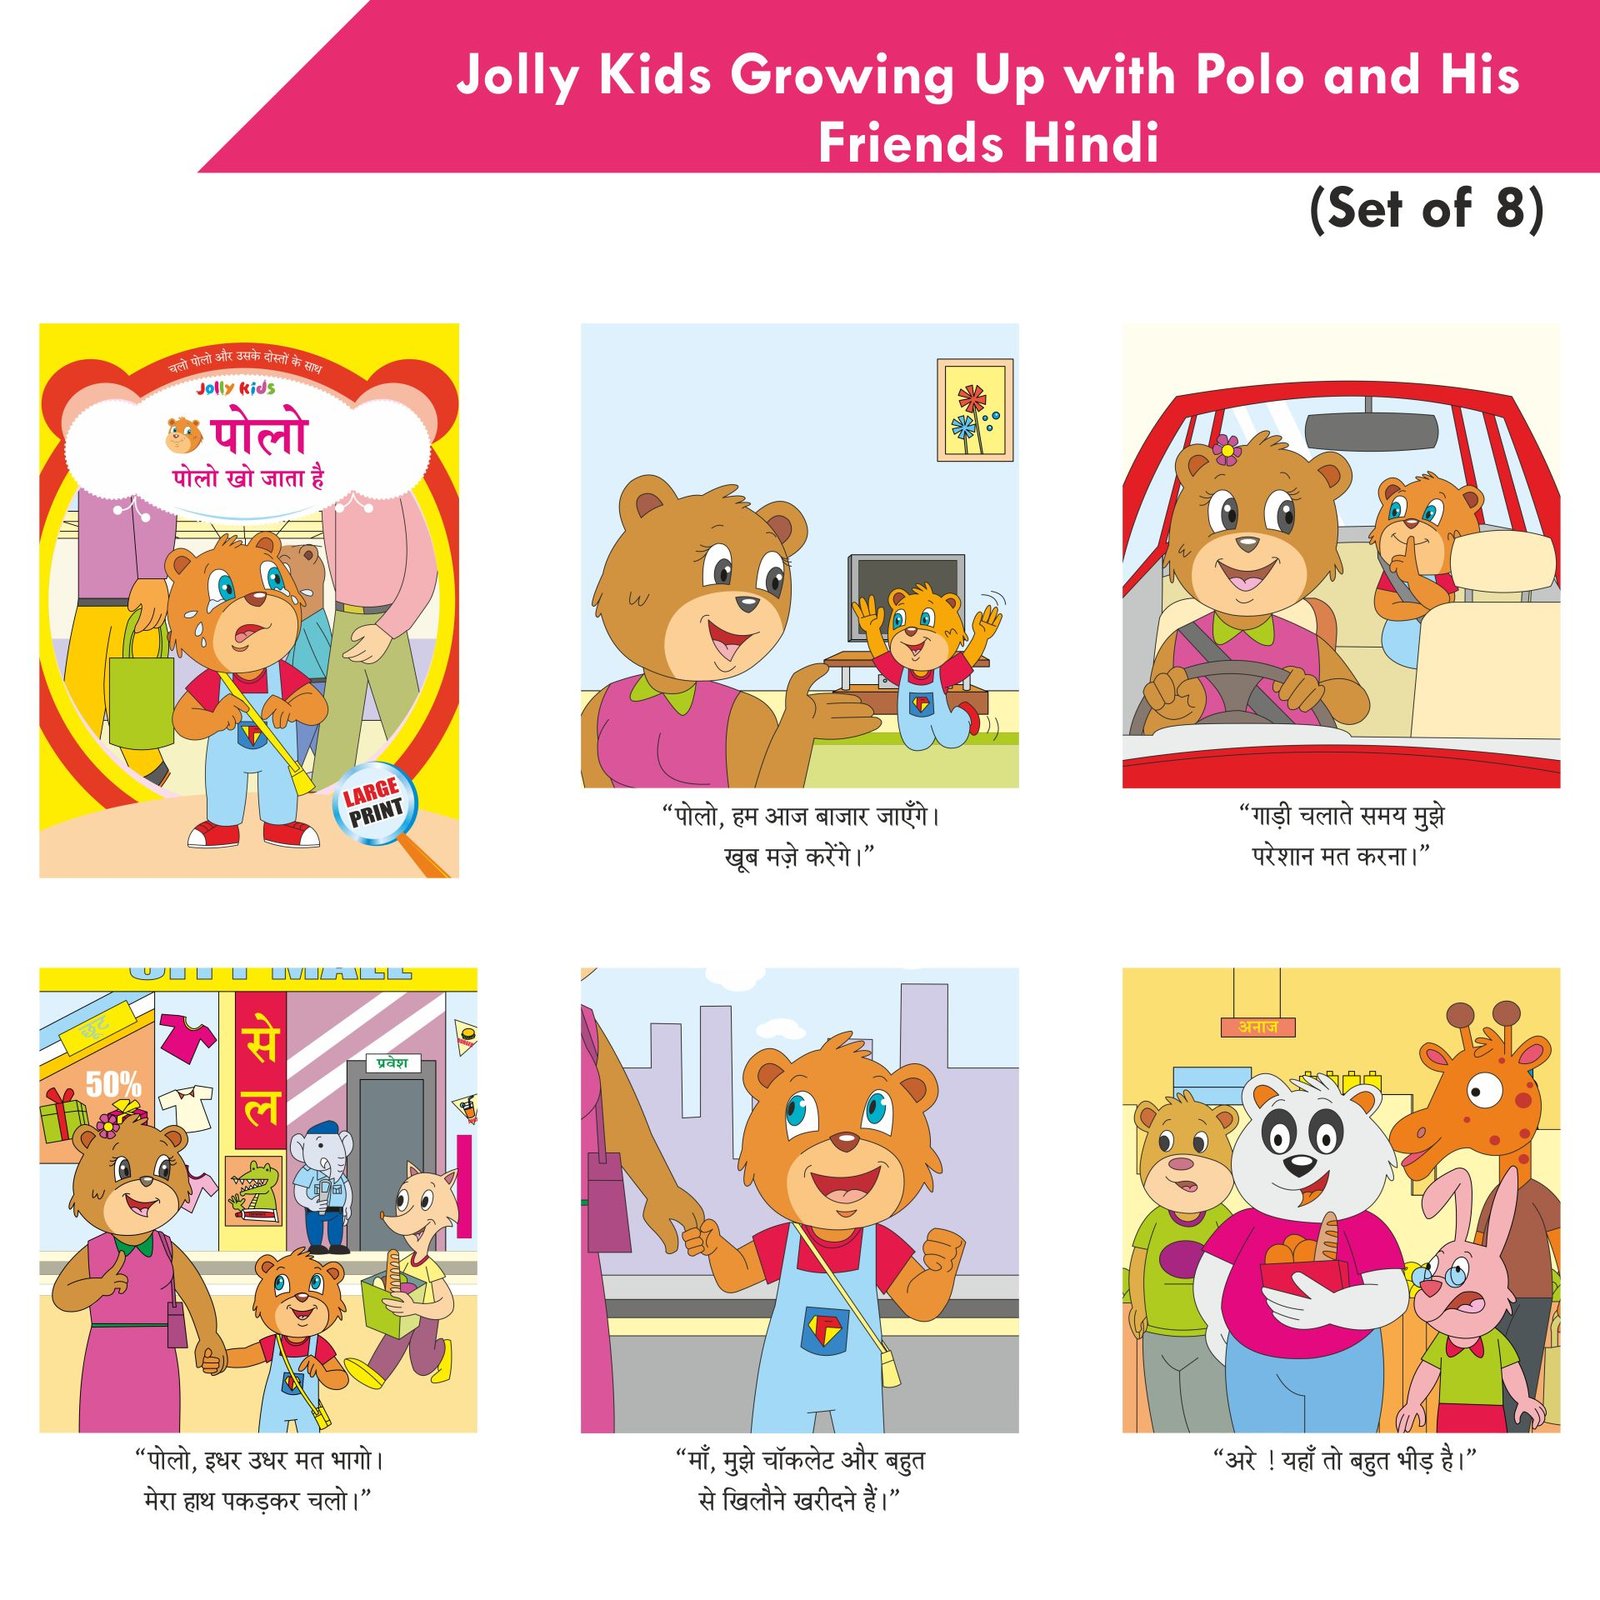 Jolly Kids Growing Up with Polo and His Friends Hindi Set of 8 7